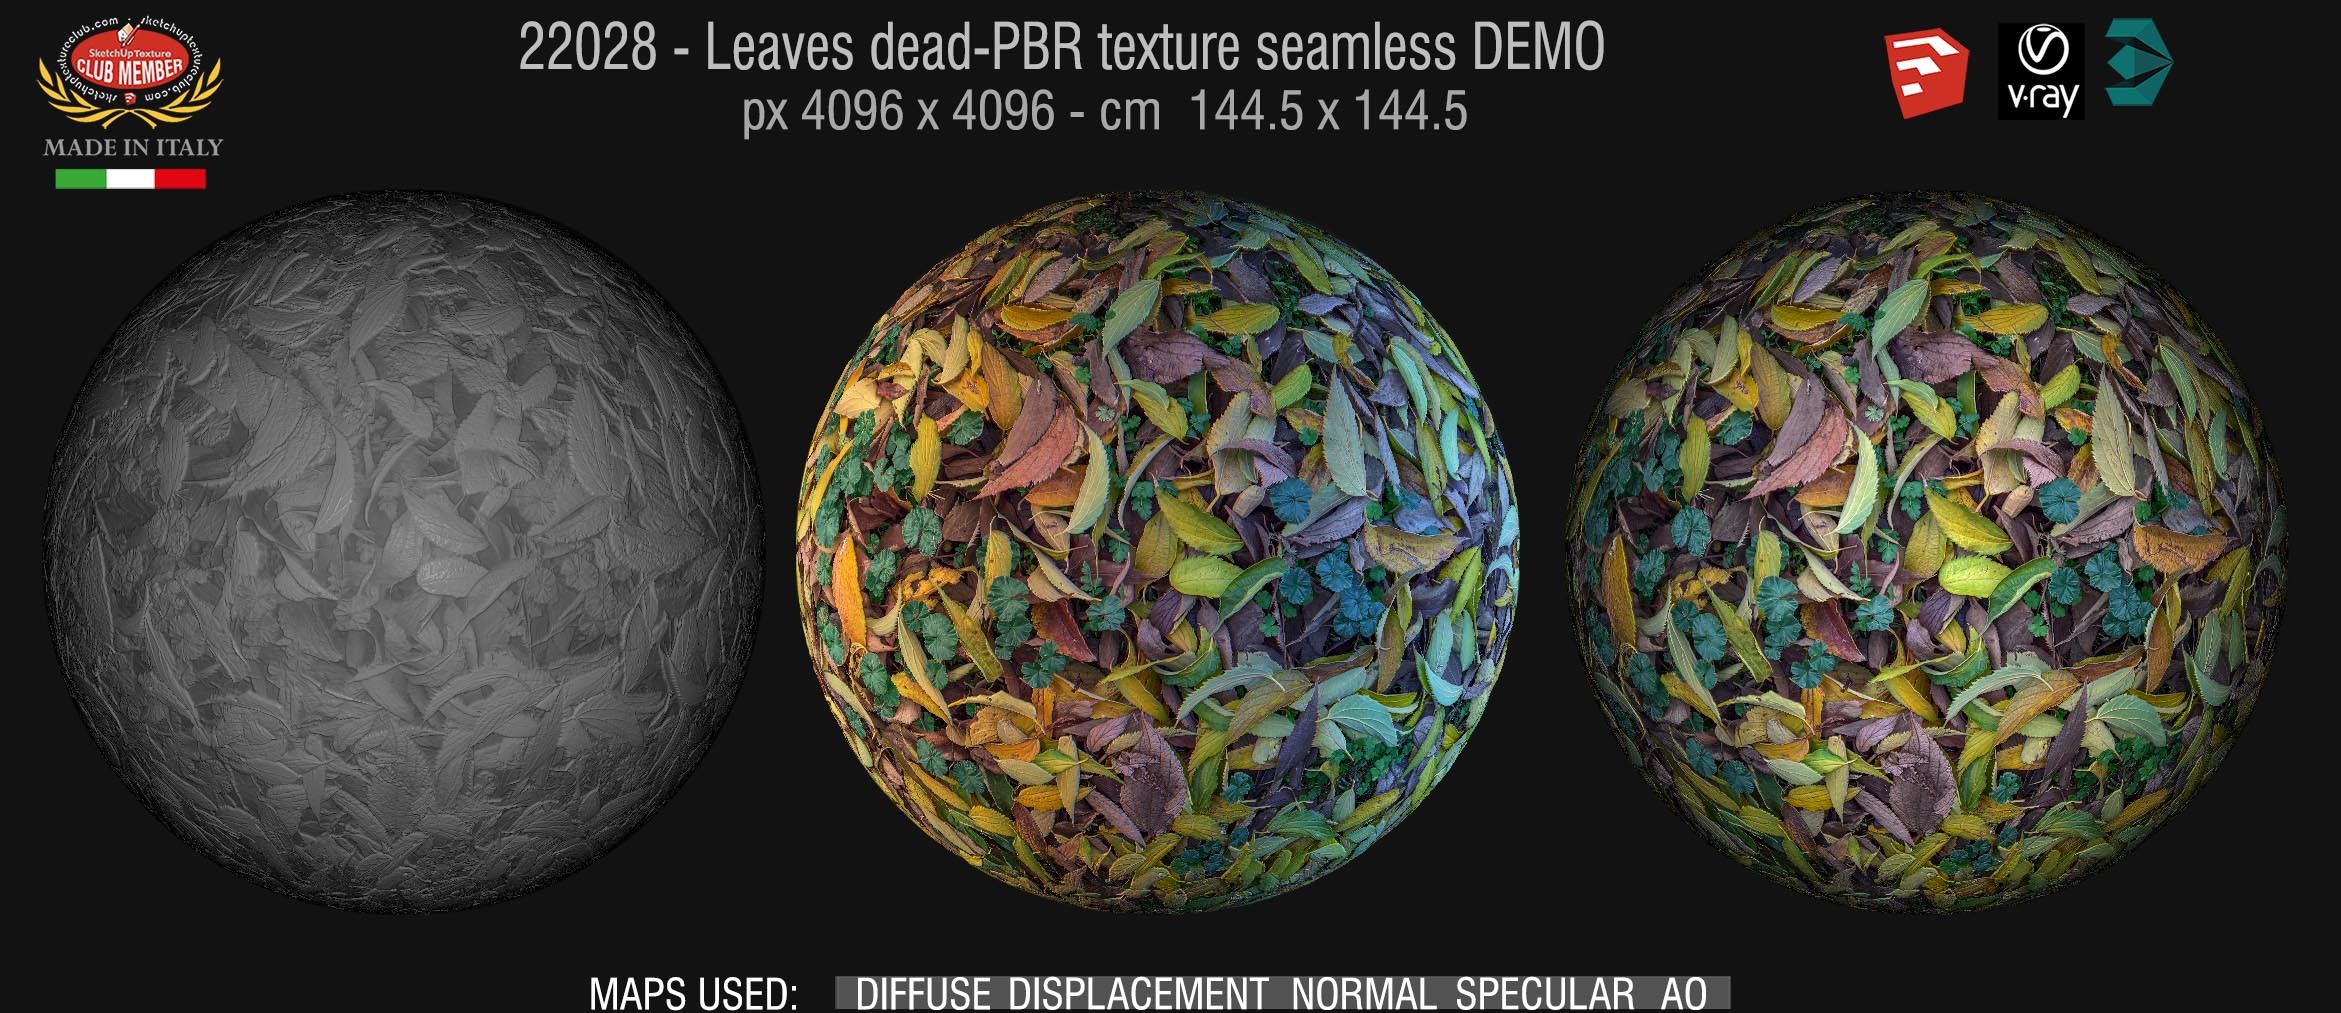 22028 leaves dead PBR texture seamless DEMO